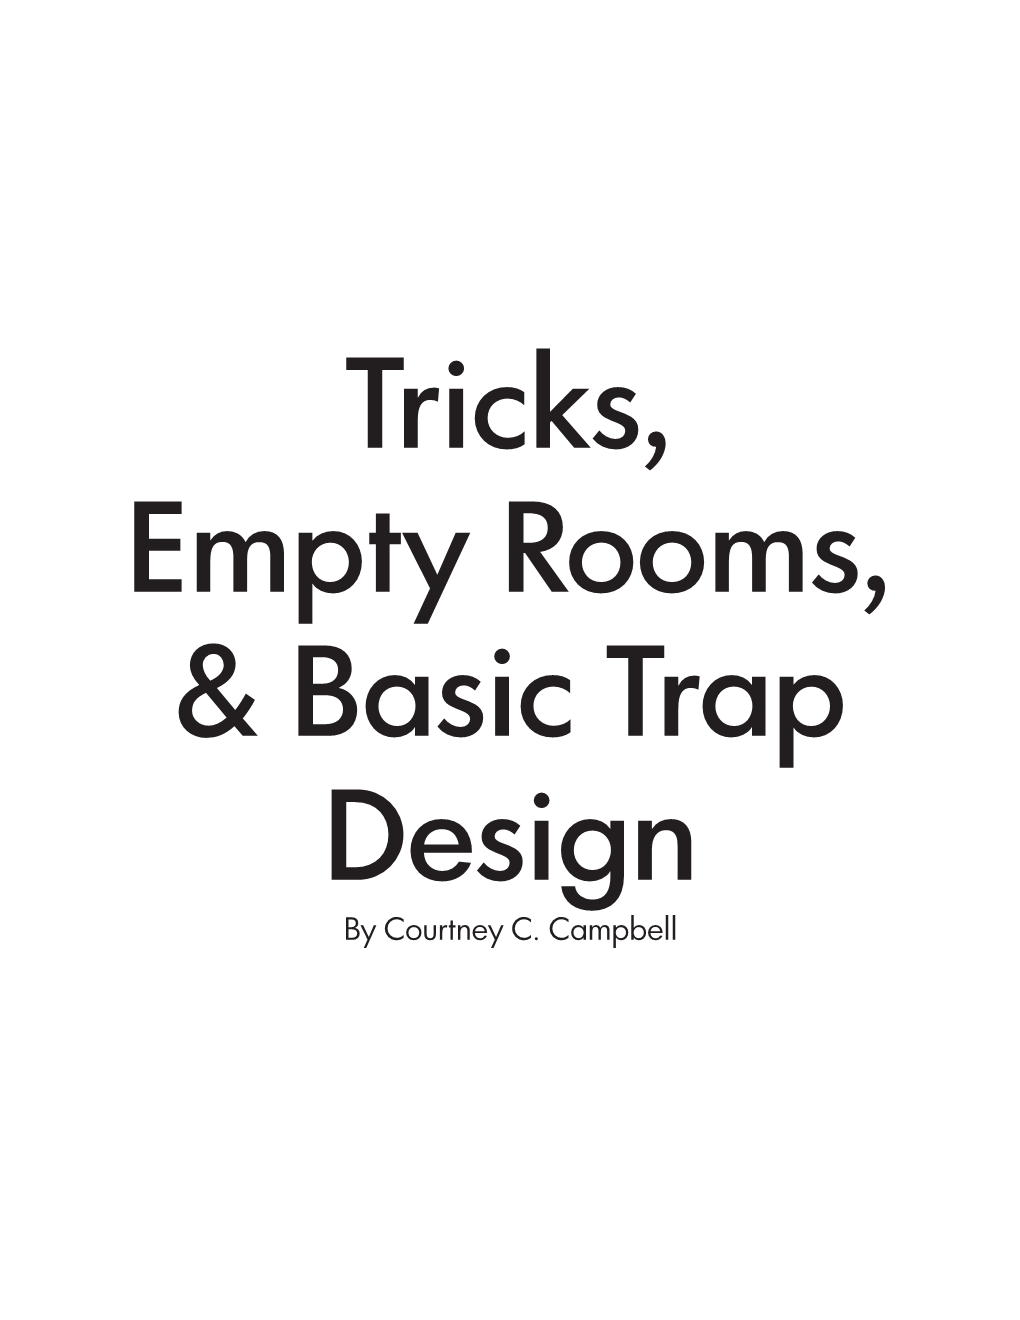 Tricks, Empty Rooms, and Basic Trap Design